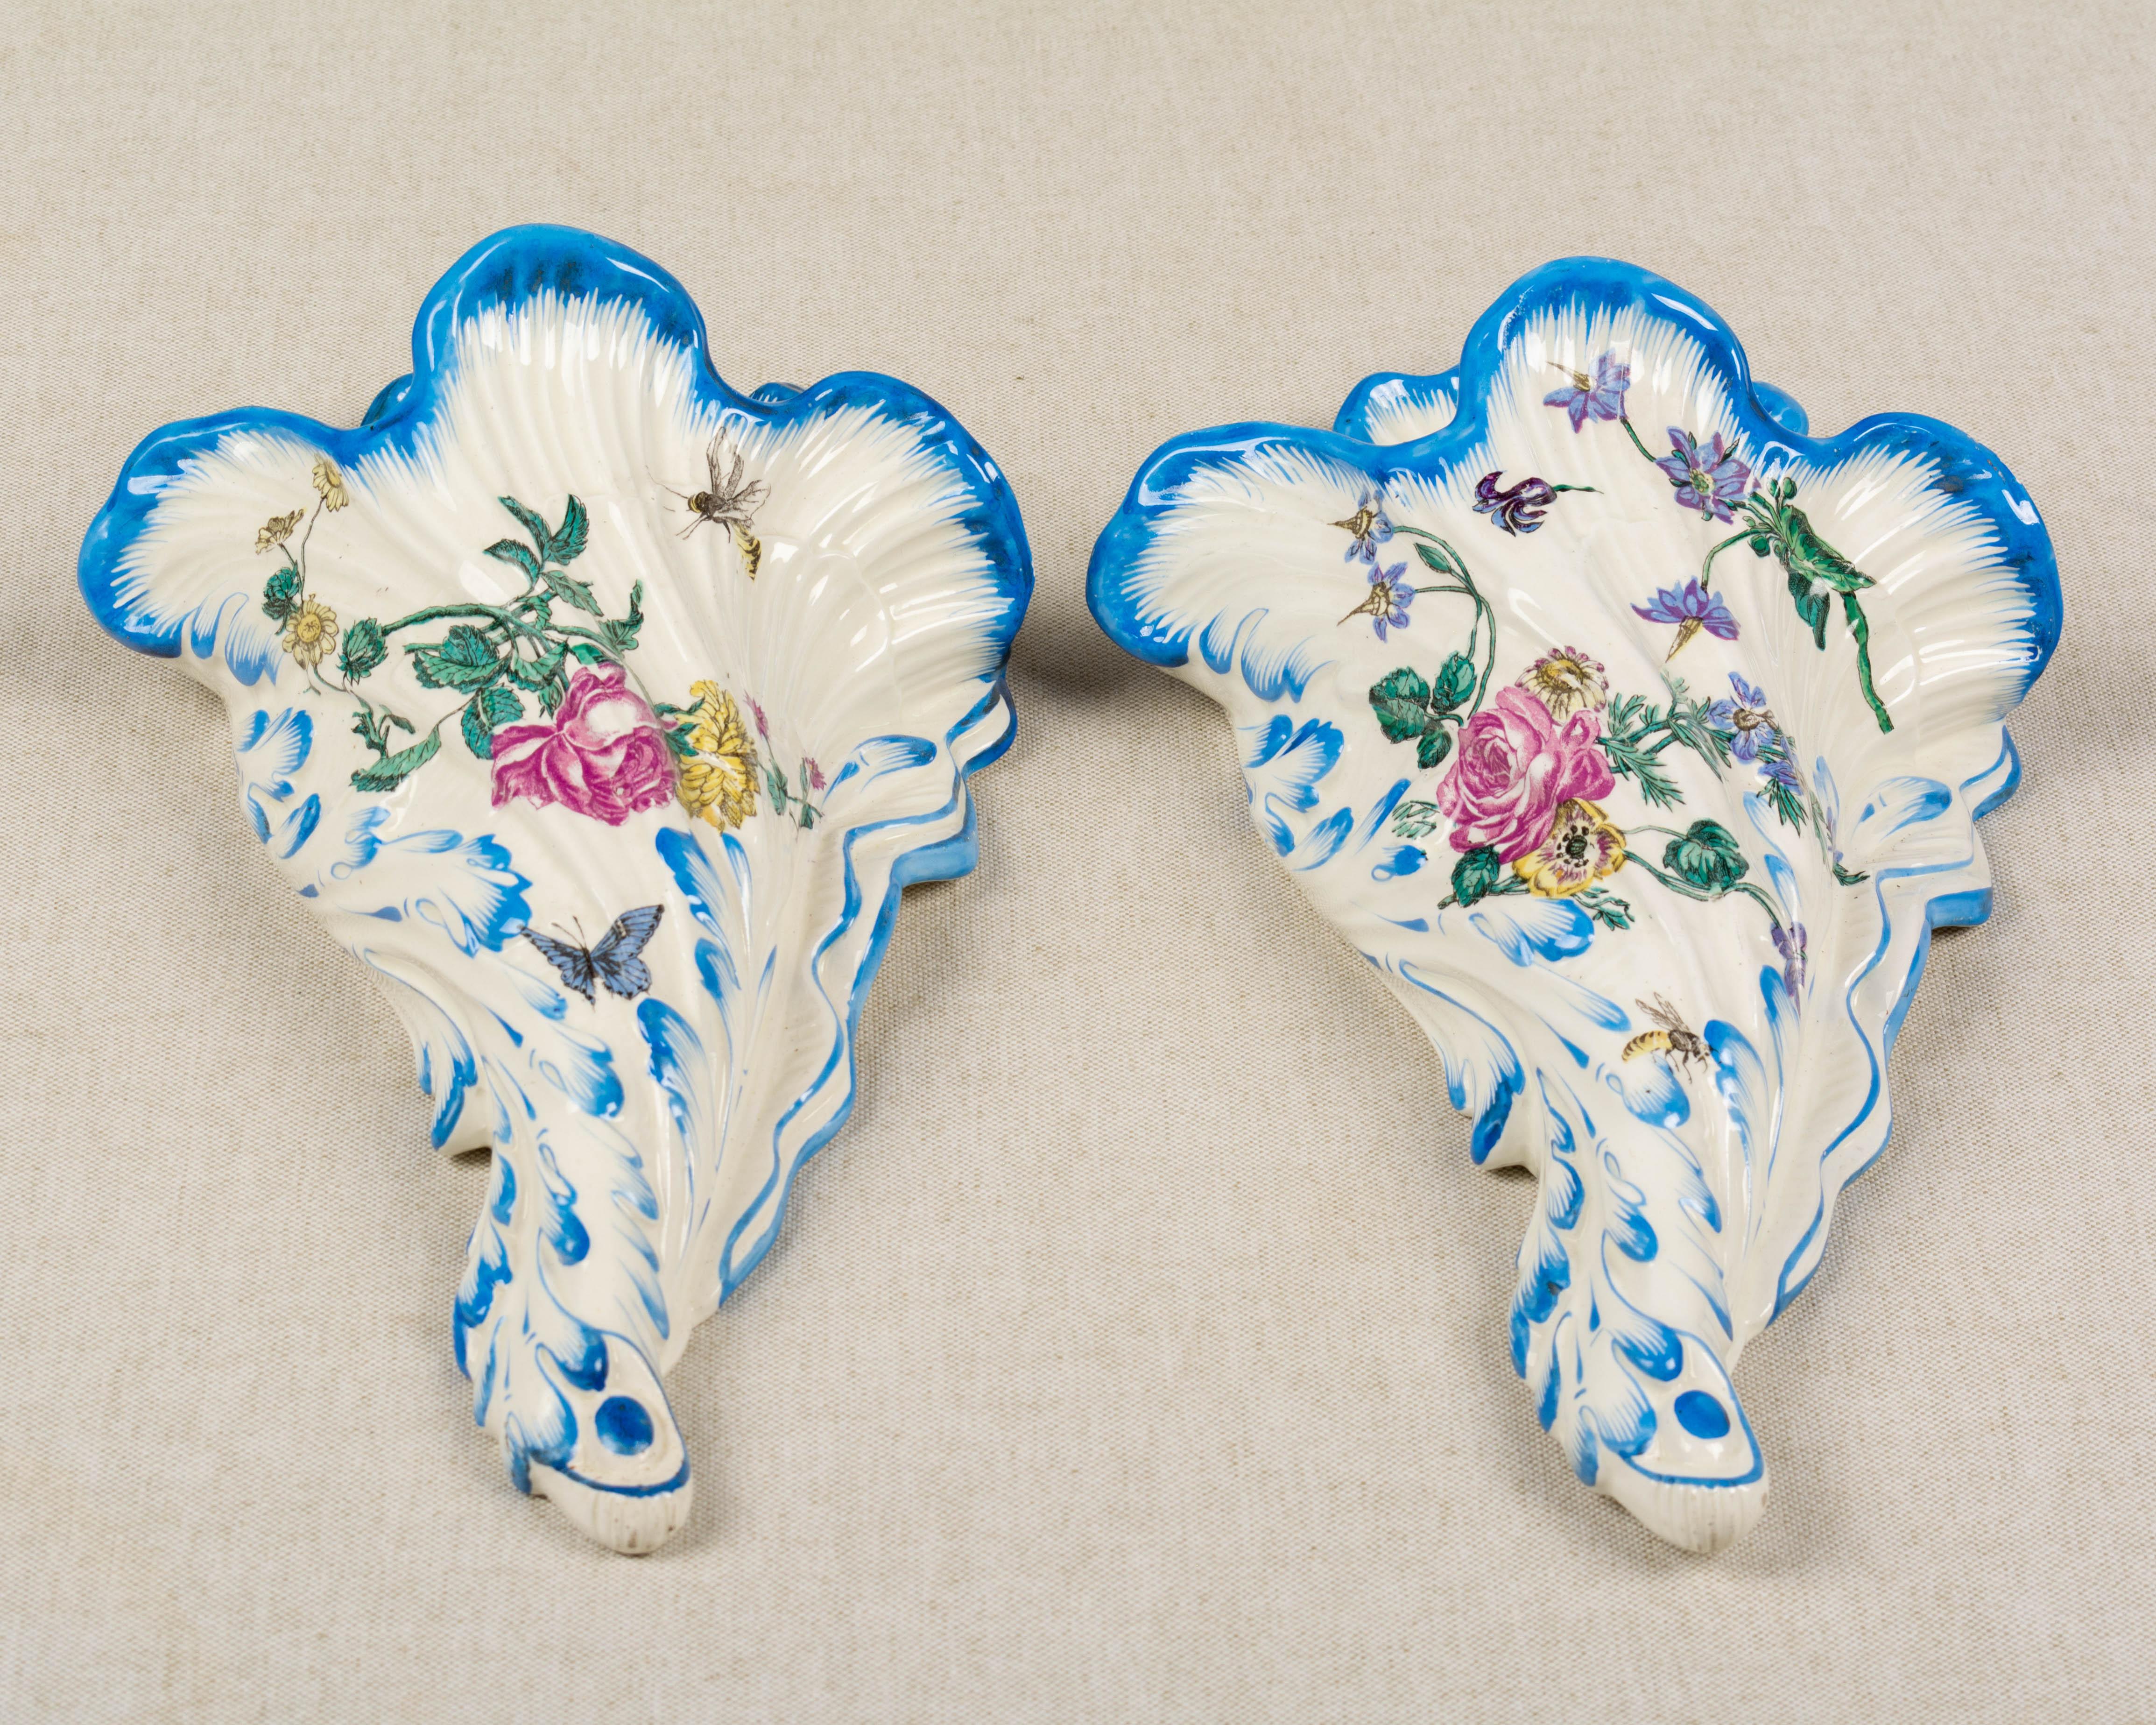 Pair of 19th Century French Gien Faience Wall Pockets In Excellent Condition For Sale In Winter Park, FL